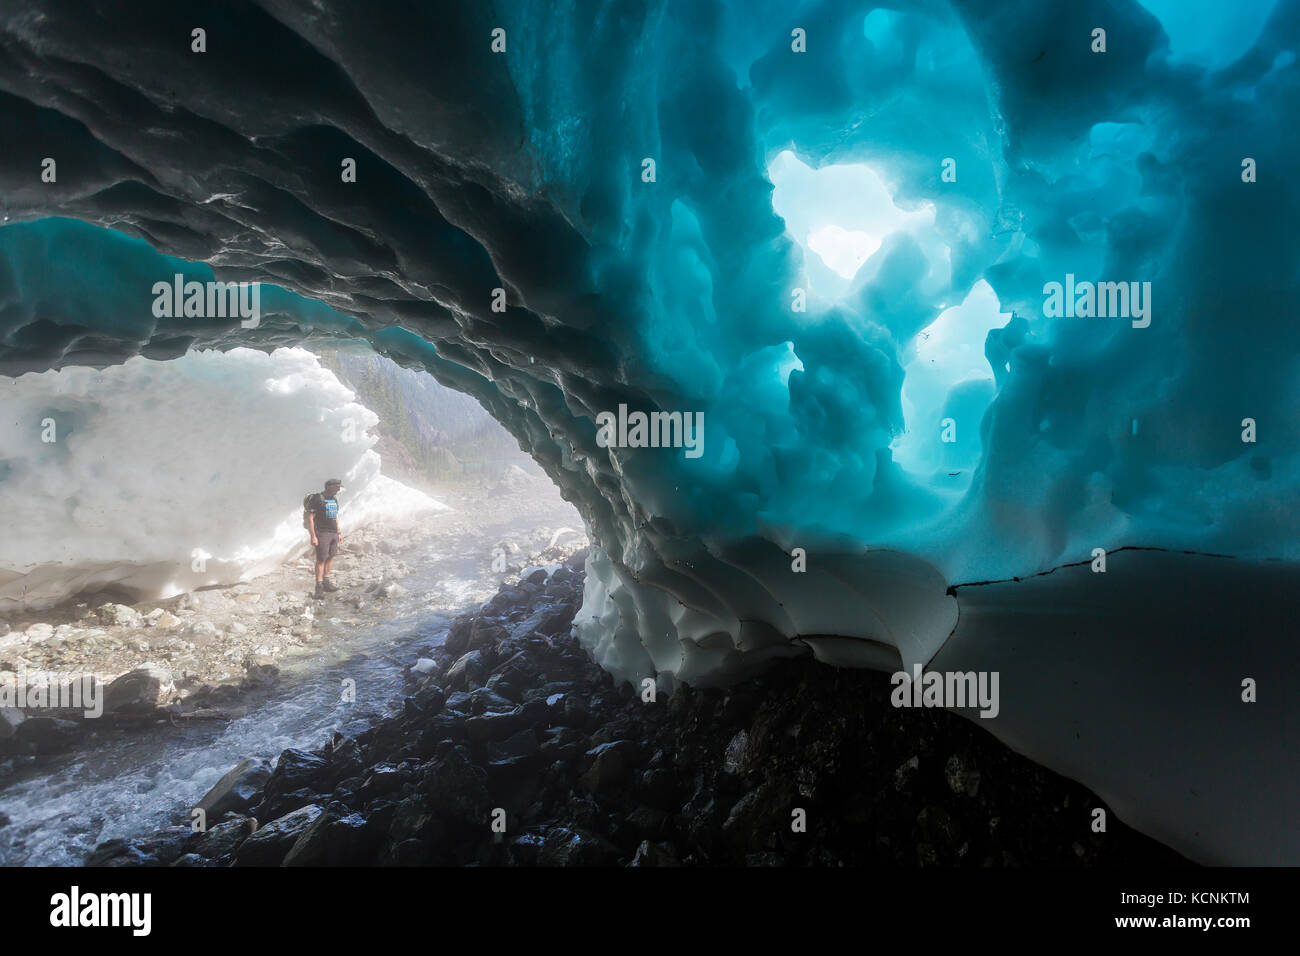 A hiker walks through a snow cave at the base of Century Sam lake, Strathcona Park, Vancouver Island, British Columbia, Canada. Stock Photo